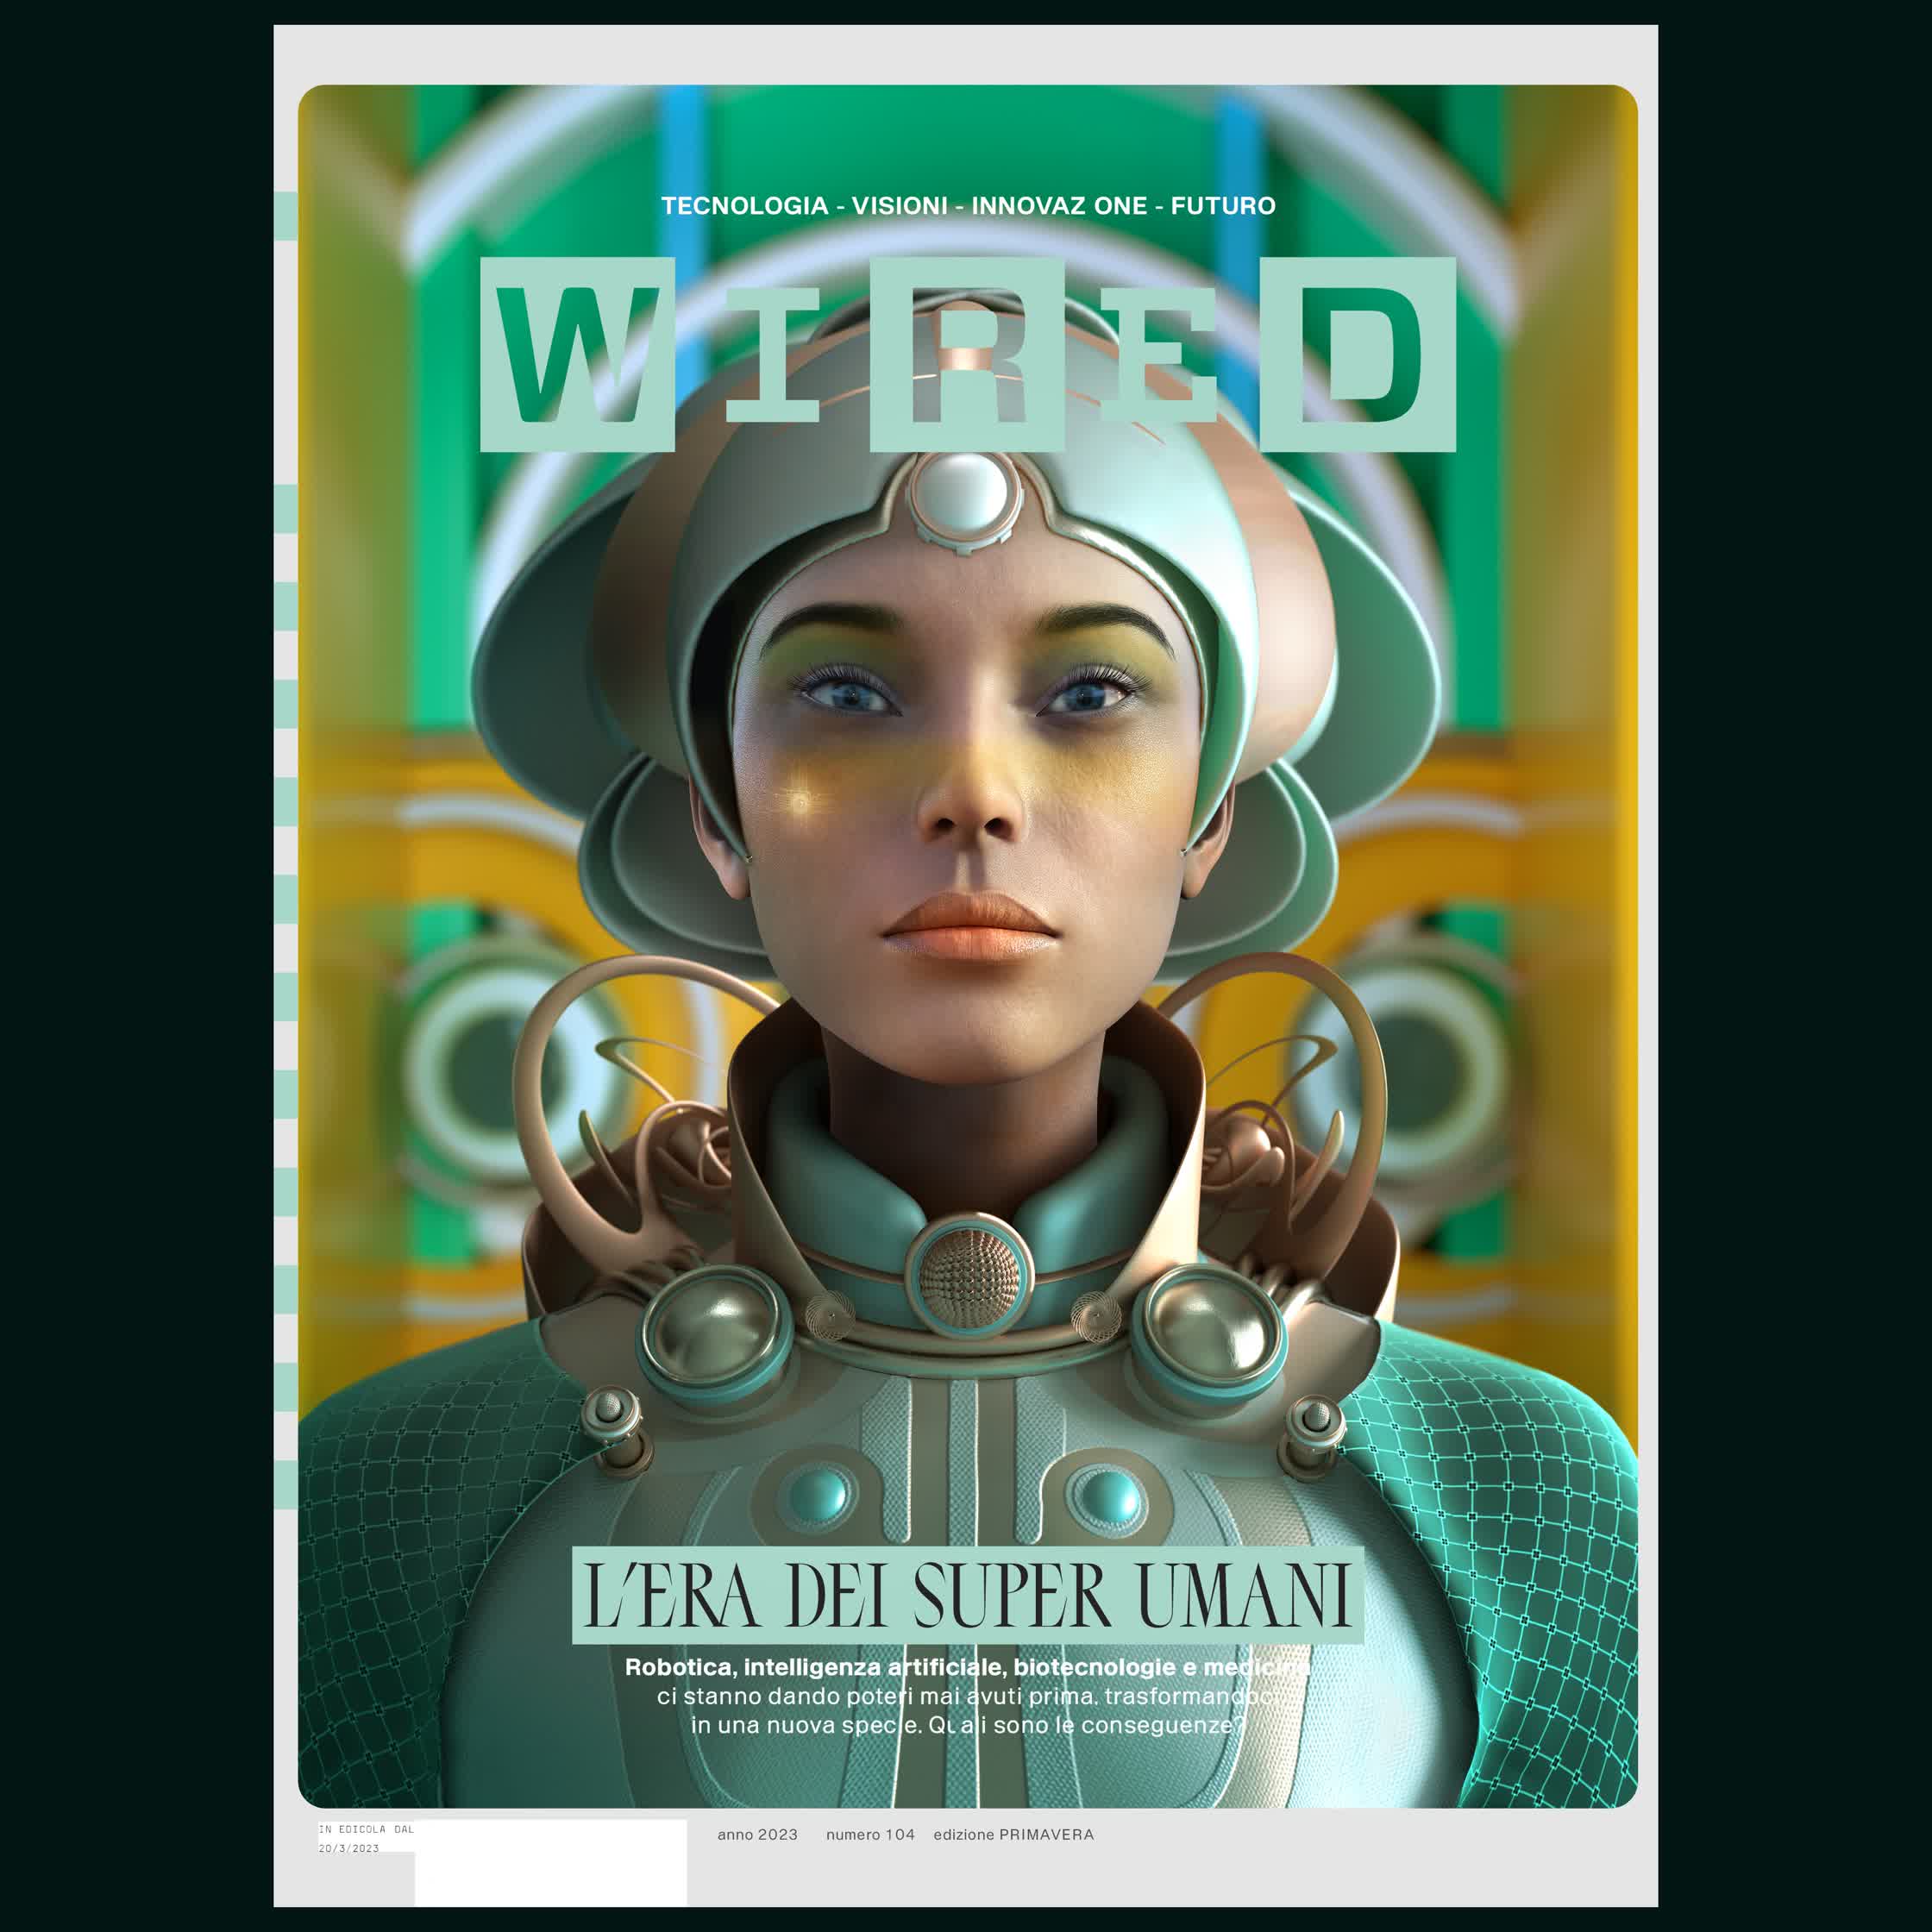 jacey_wired_cover_square.jpg